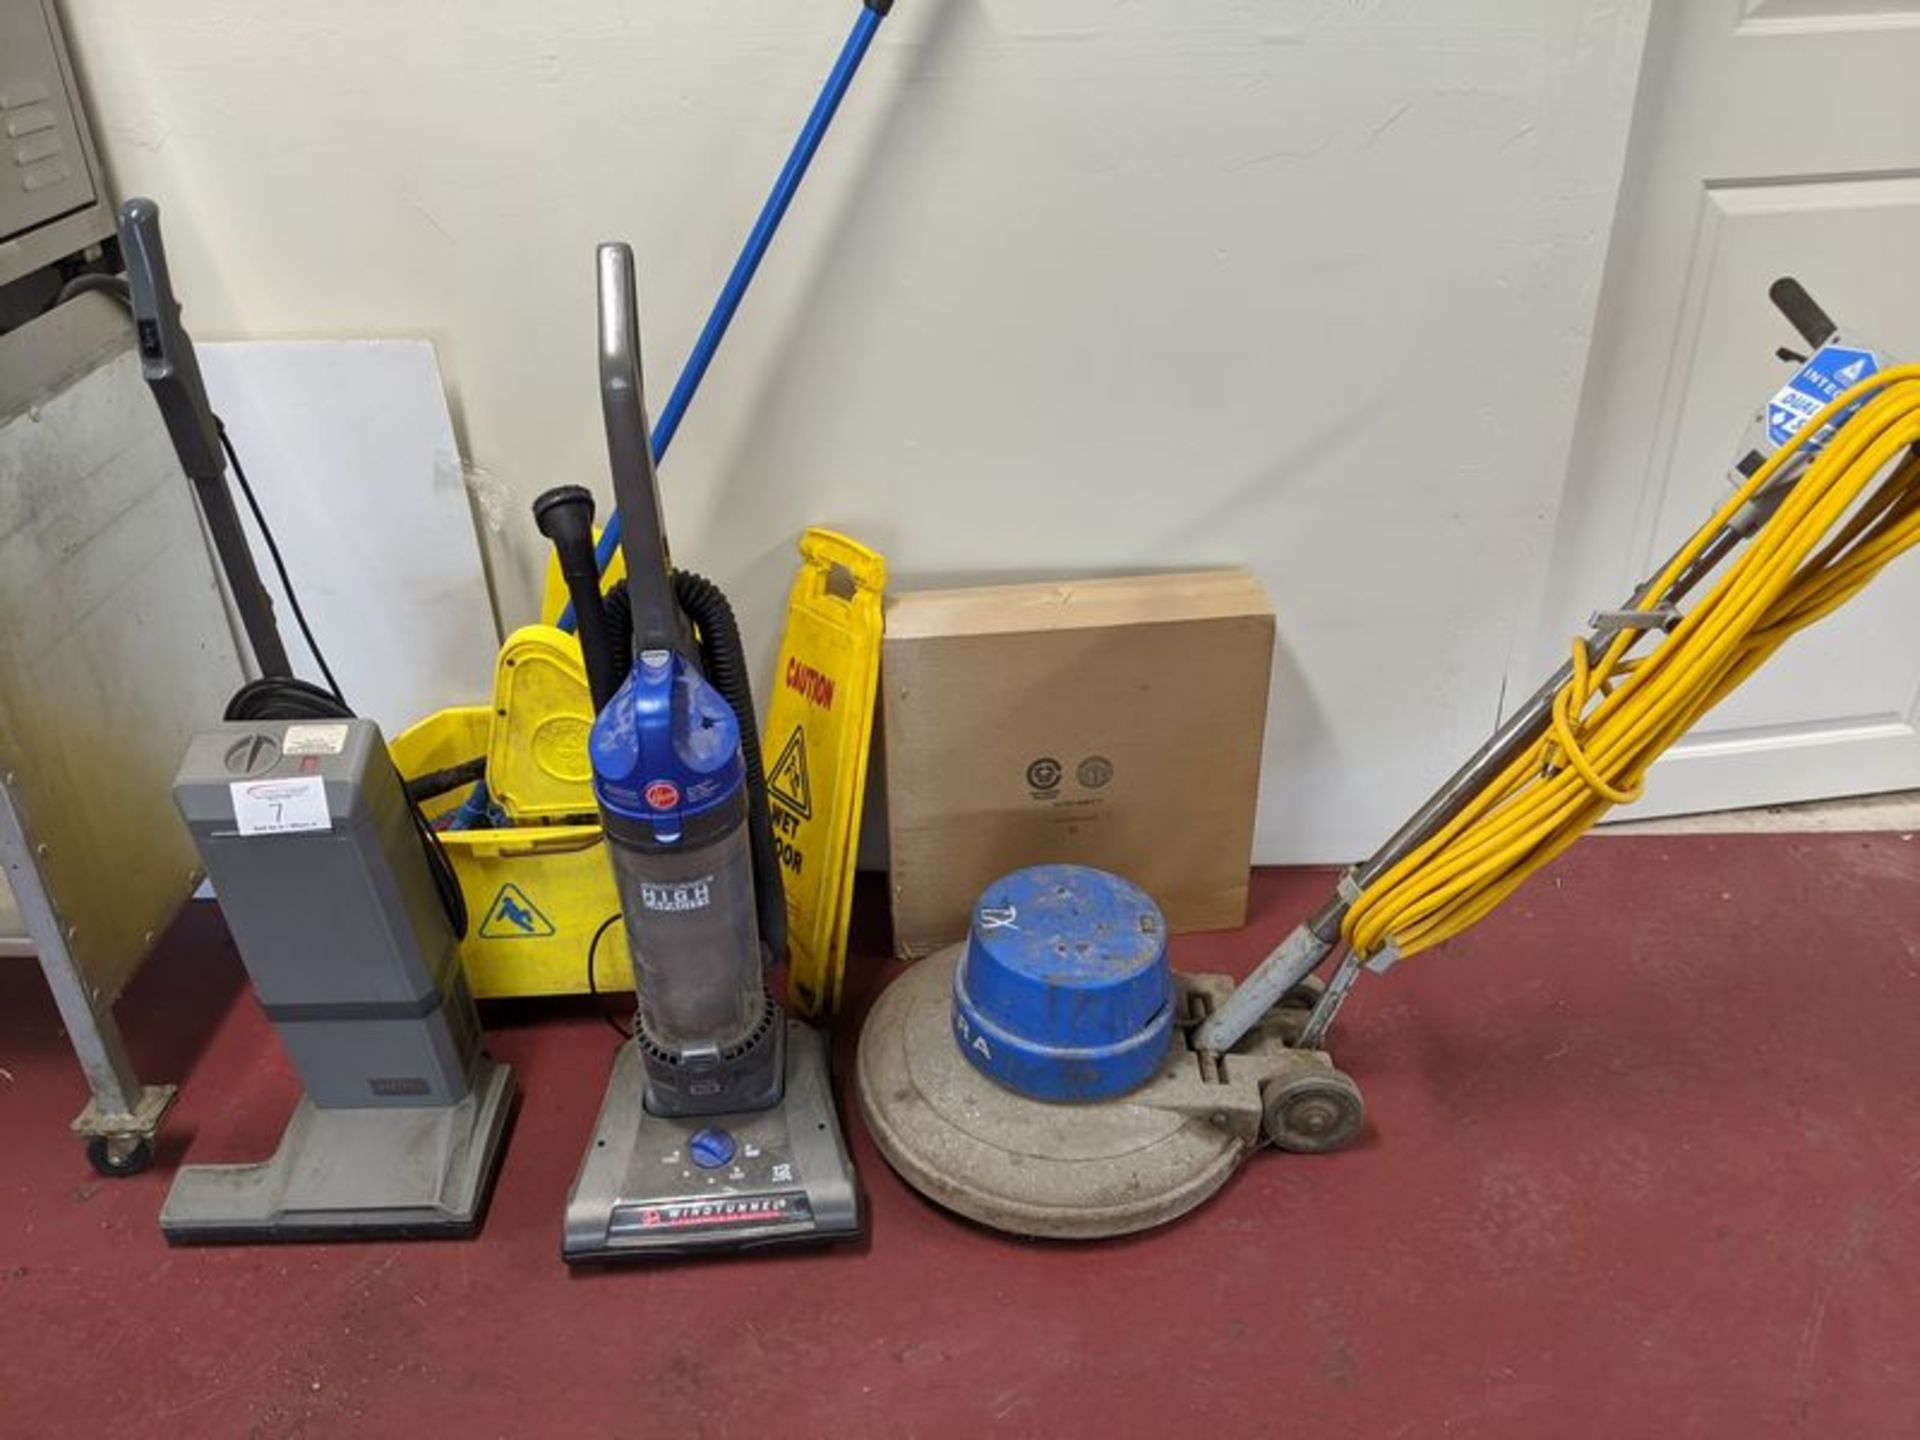 2 Vacuums, Floor Polisher, Mop and Pail, Box of Scrub Pads